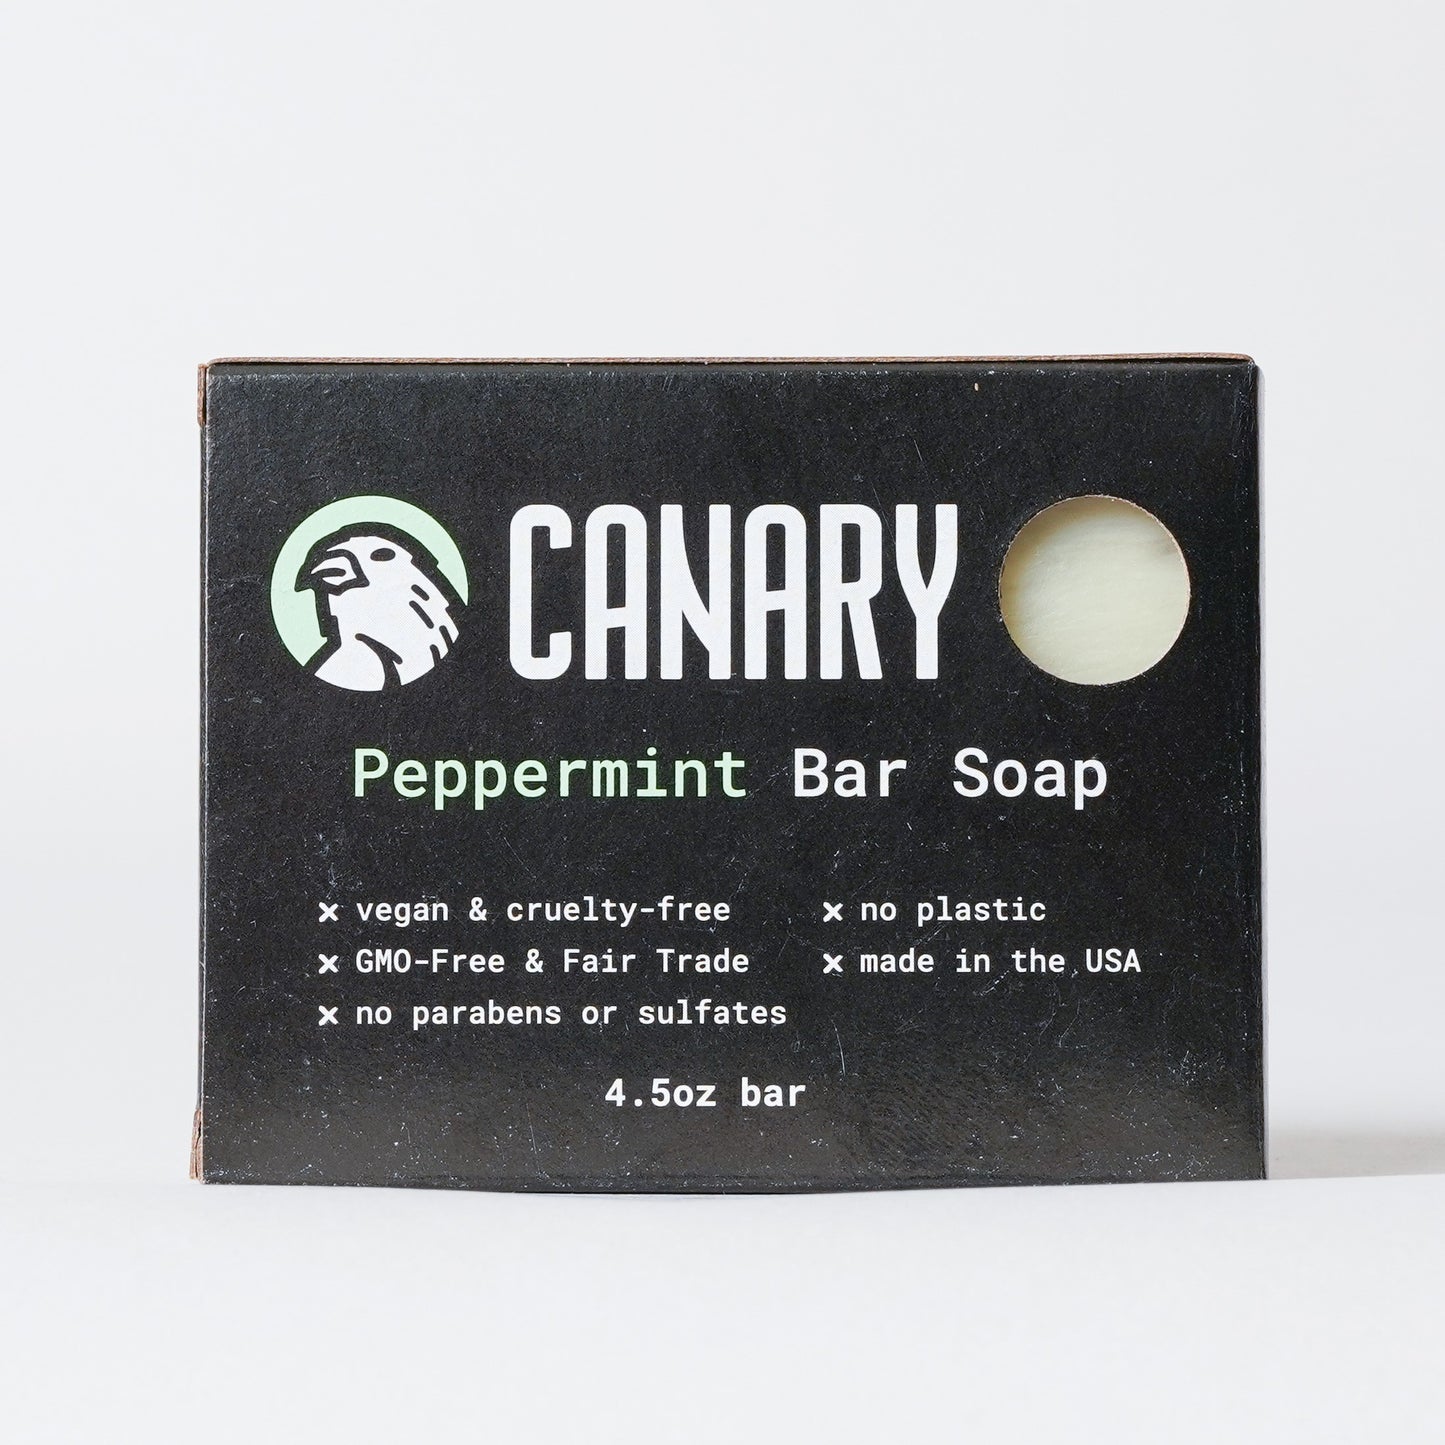 Canary Peppermint Bar Soap in plastic-free packaging